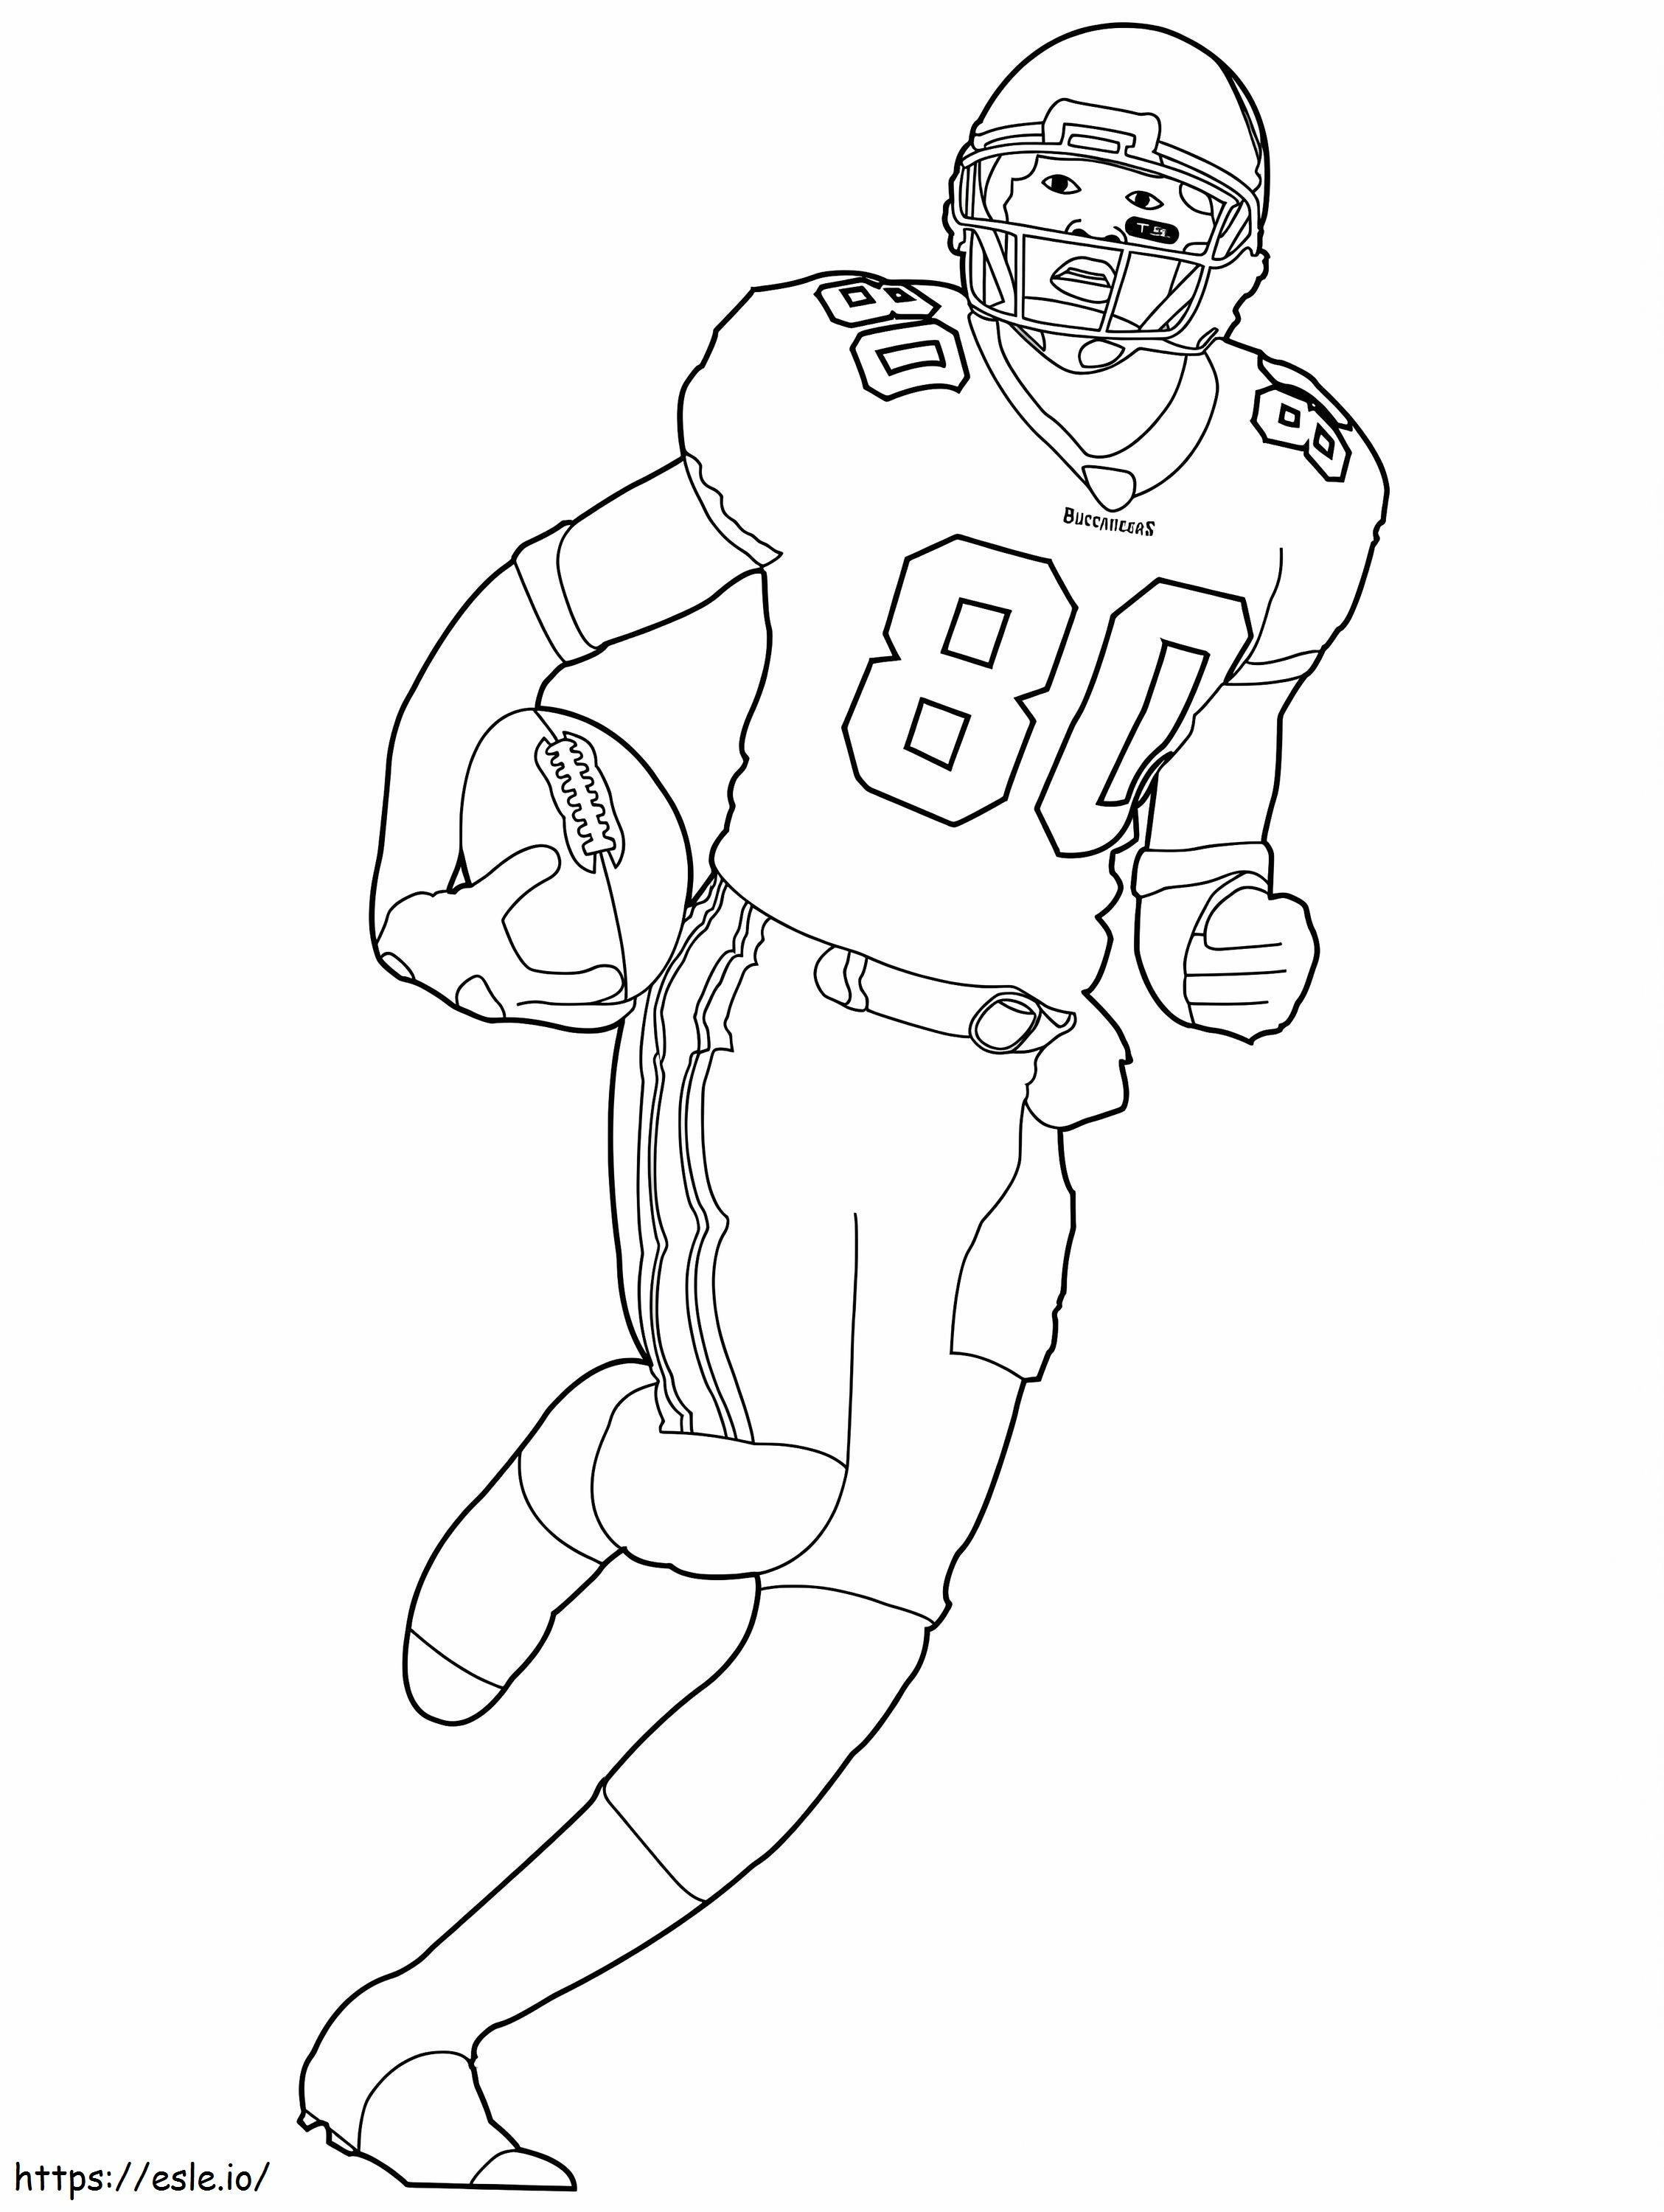 Football Player 1 coloring page